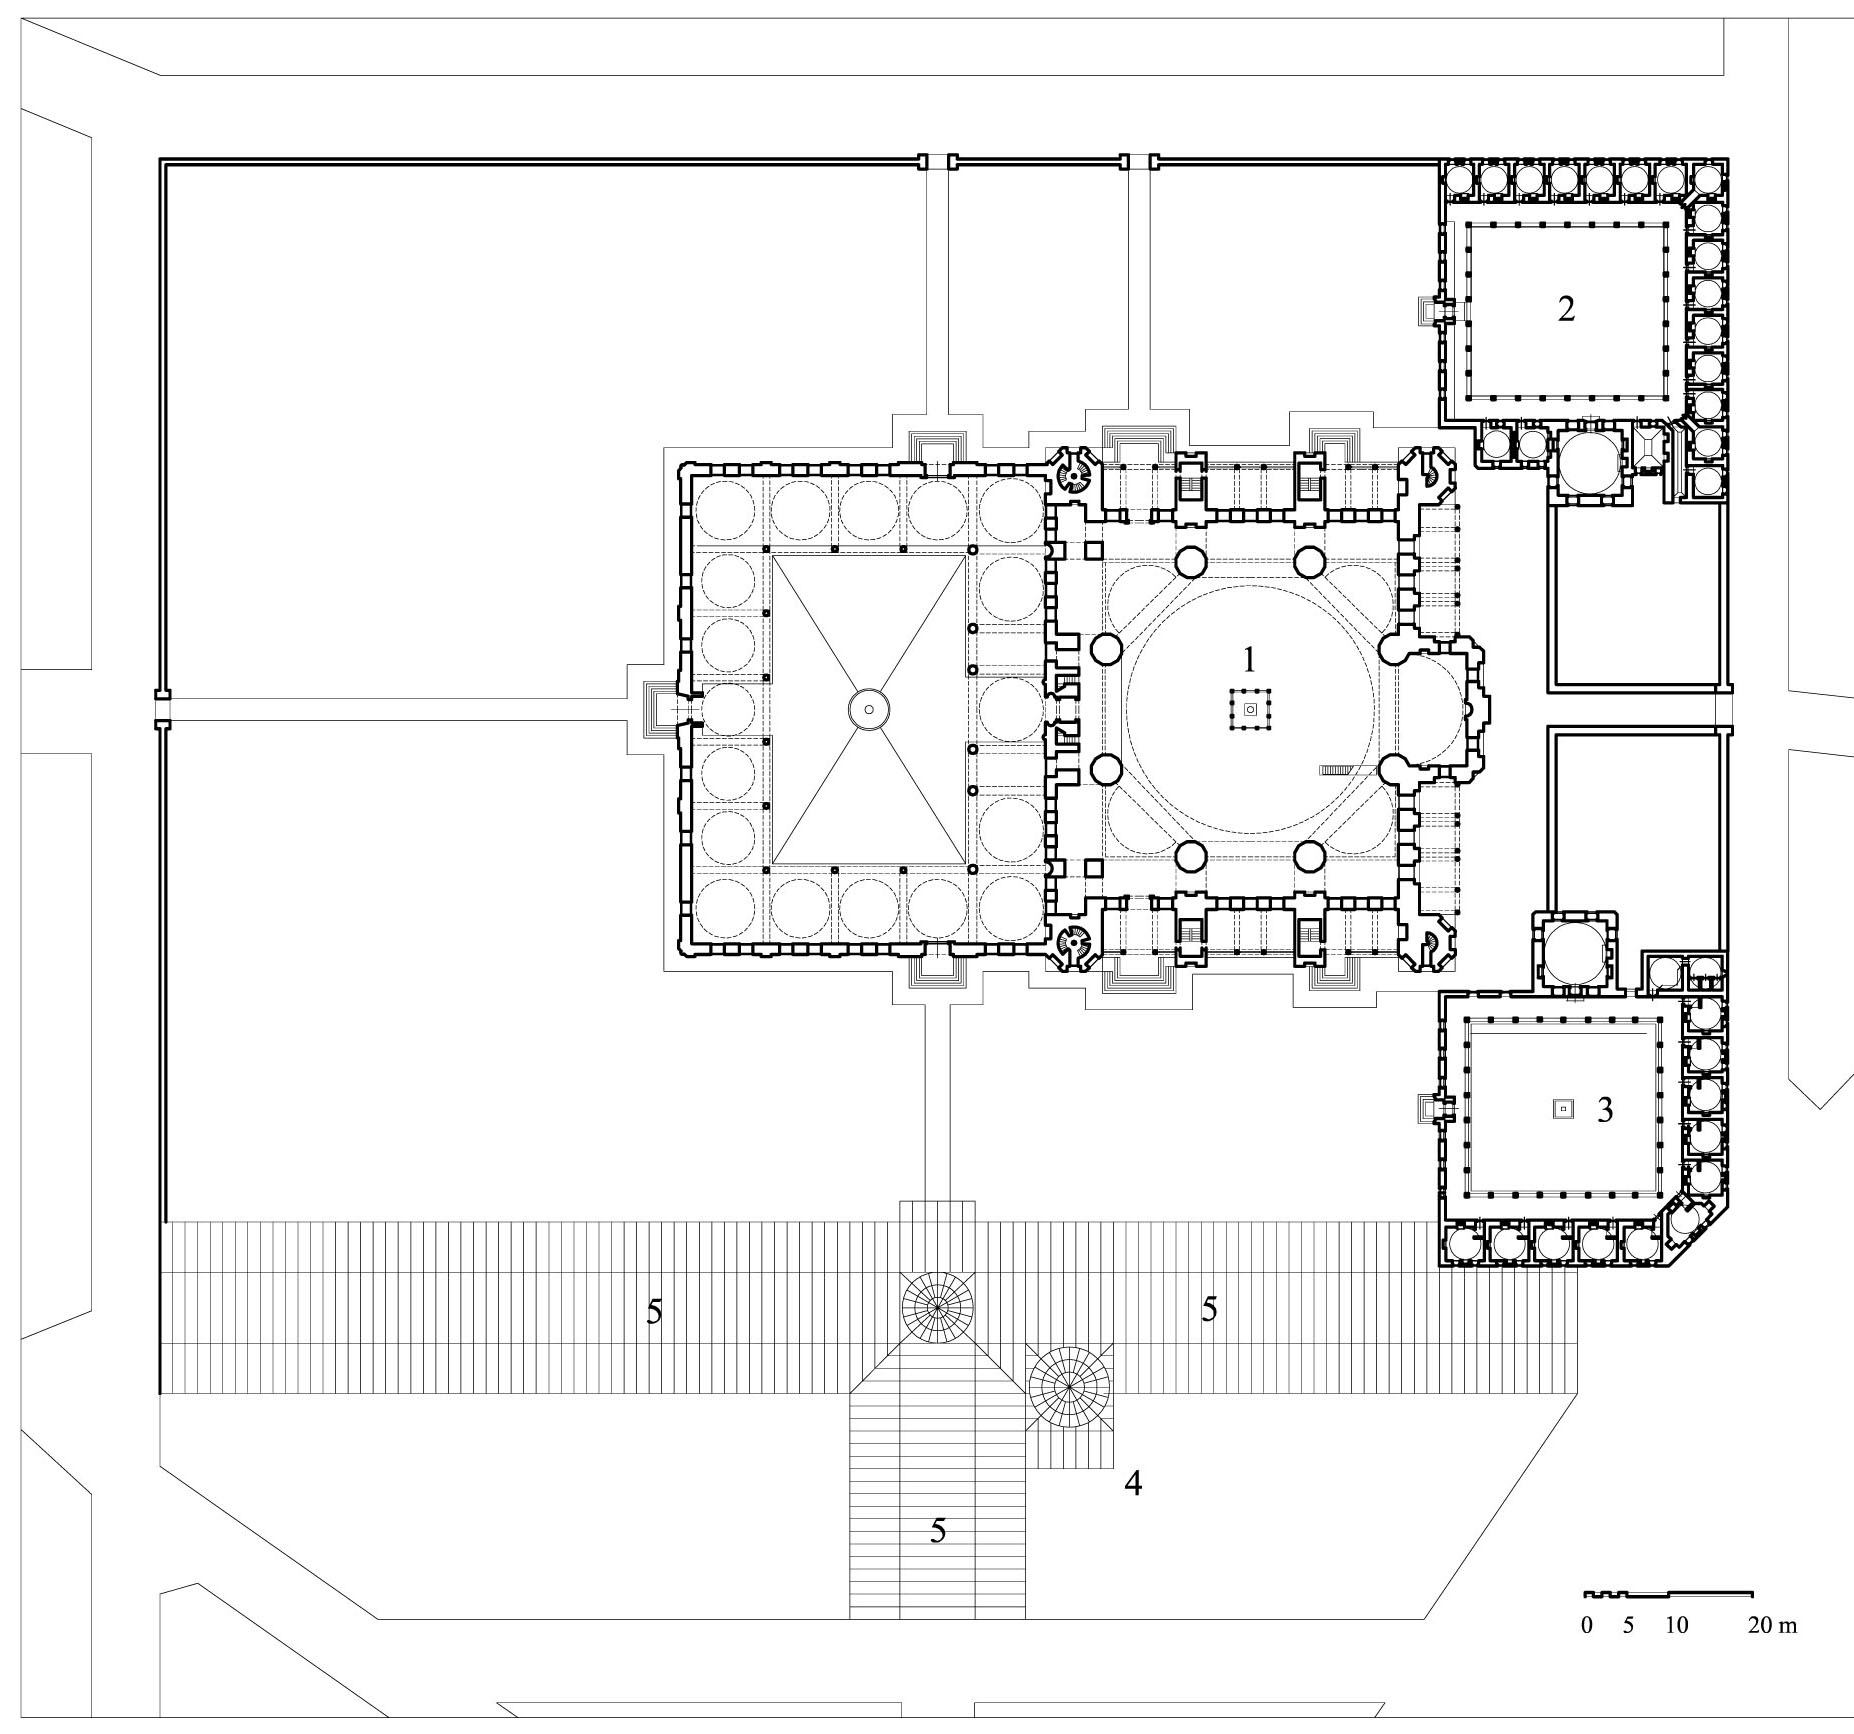 Selimiye Külliyesi - Floor plan of the complex showing (1) mosque, (2) madrasa (hadith college), (3) madrasa (Koran recitation school), (4) elementary school, (5) bazaar (<i>arasta</i>). DWG file in AutoCAD 2000 format. Click the download button to download a zipped file containing the .dwg file.